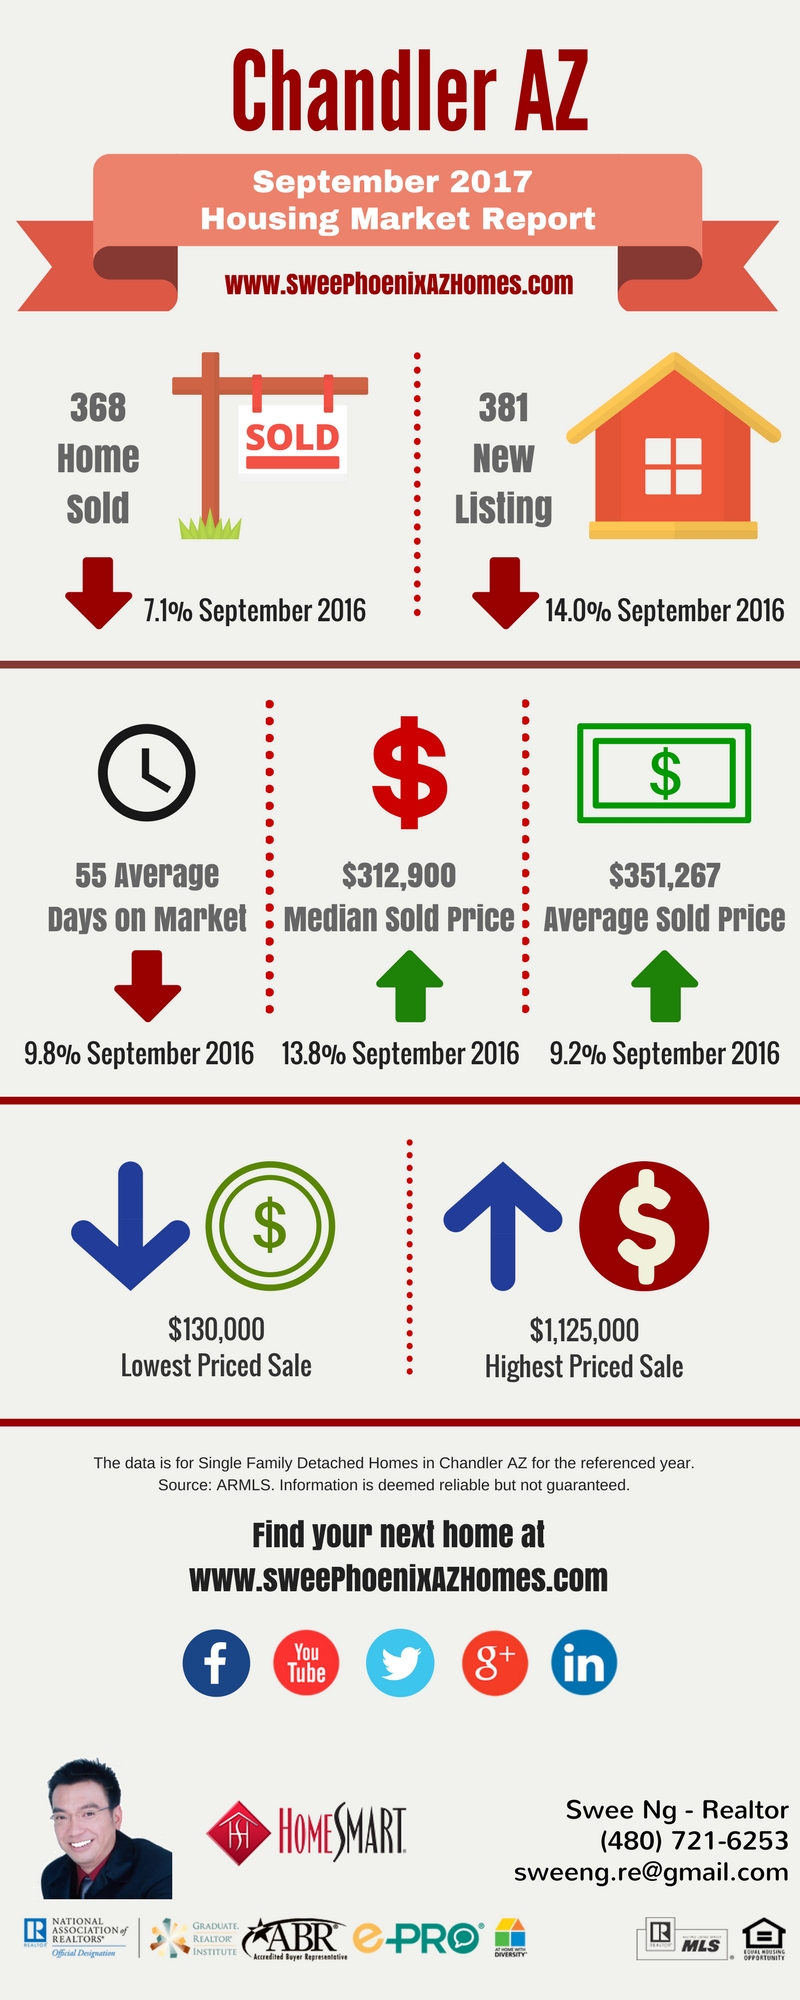 Chandler AZ Housing Market Update September 2017 by Swee Ng, House Value and Real Estate Listings